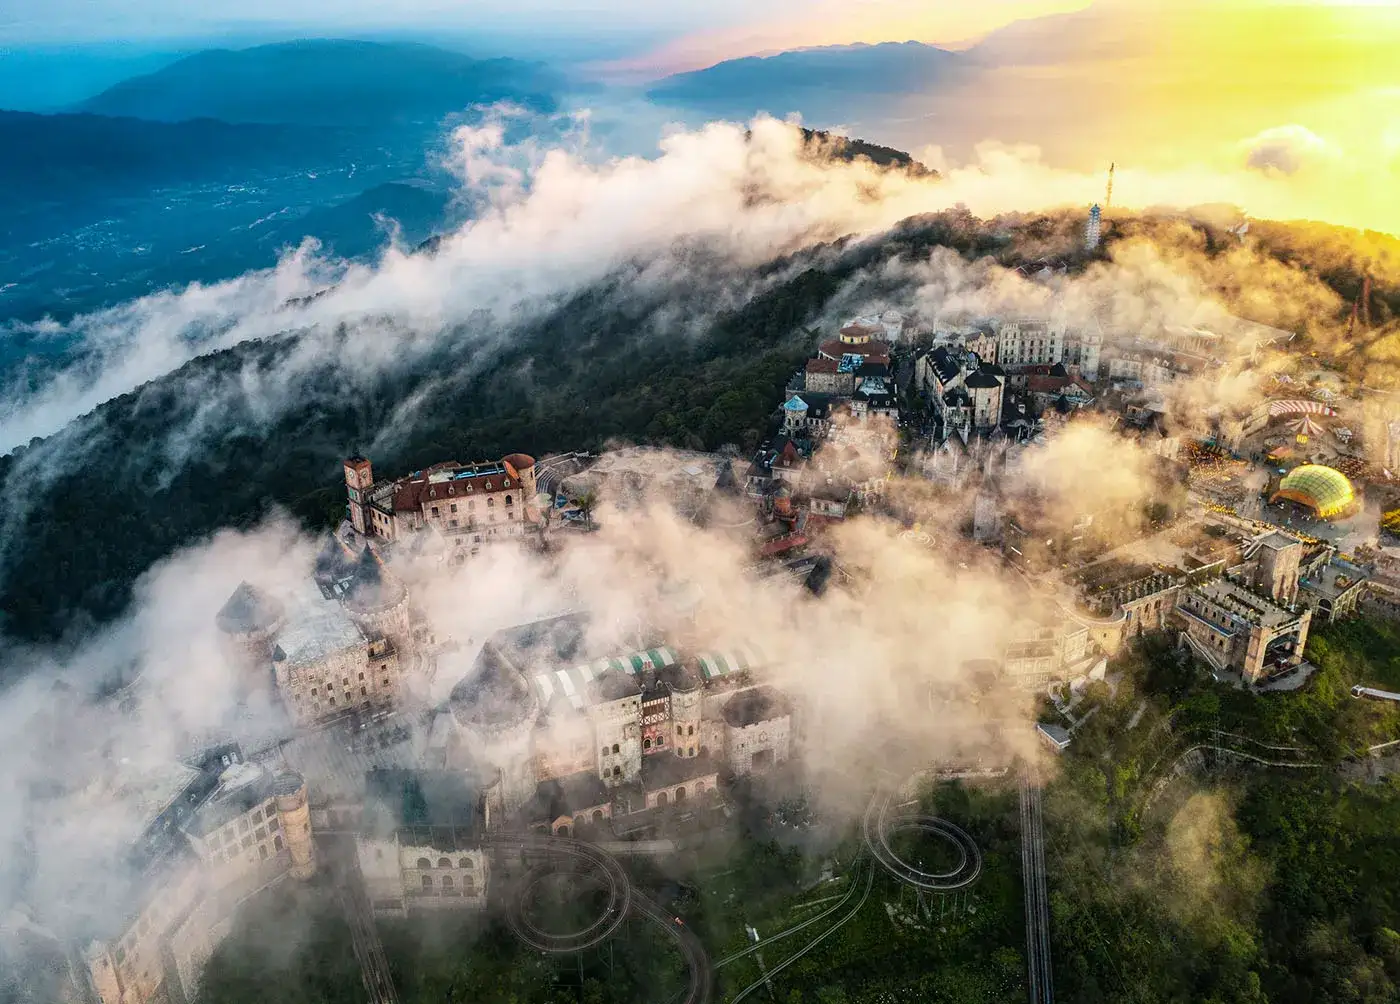 Ba Na Hills is immersed in a sea of clouds